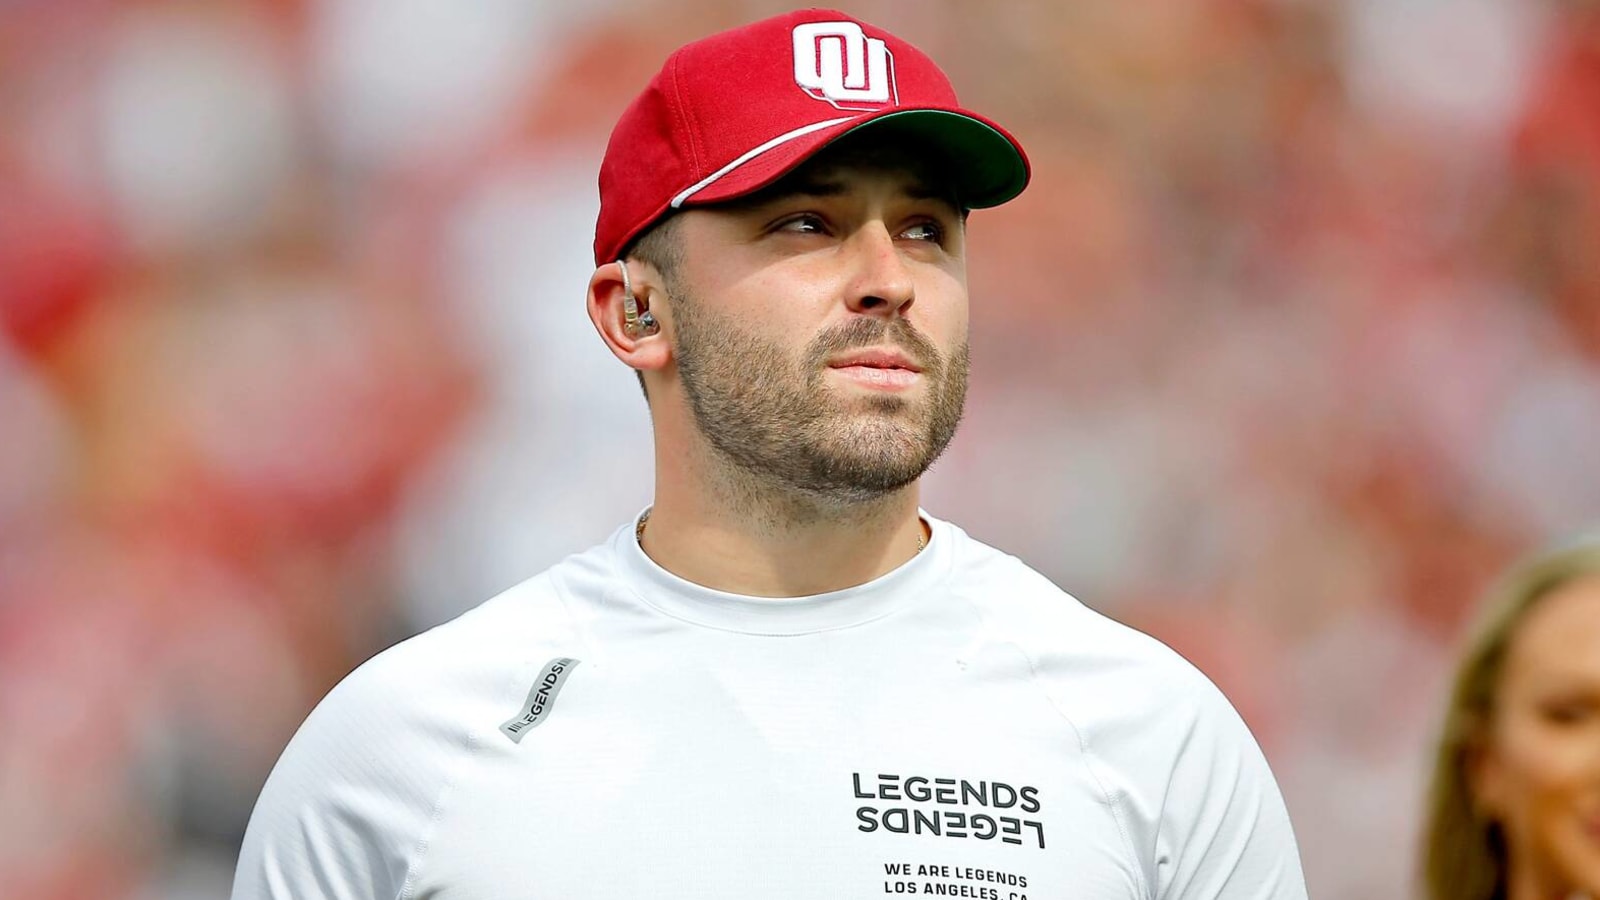 More details on Baker Mayfield's Panthers contract emerge